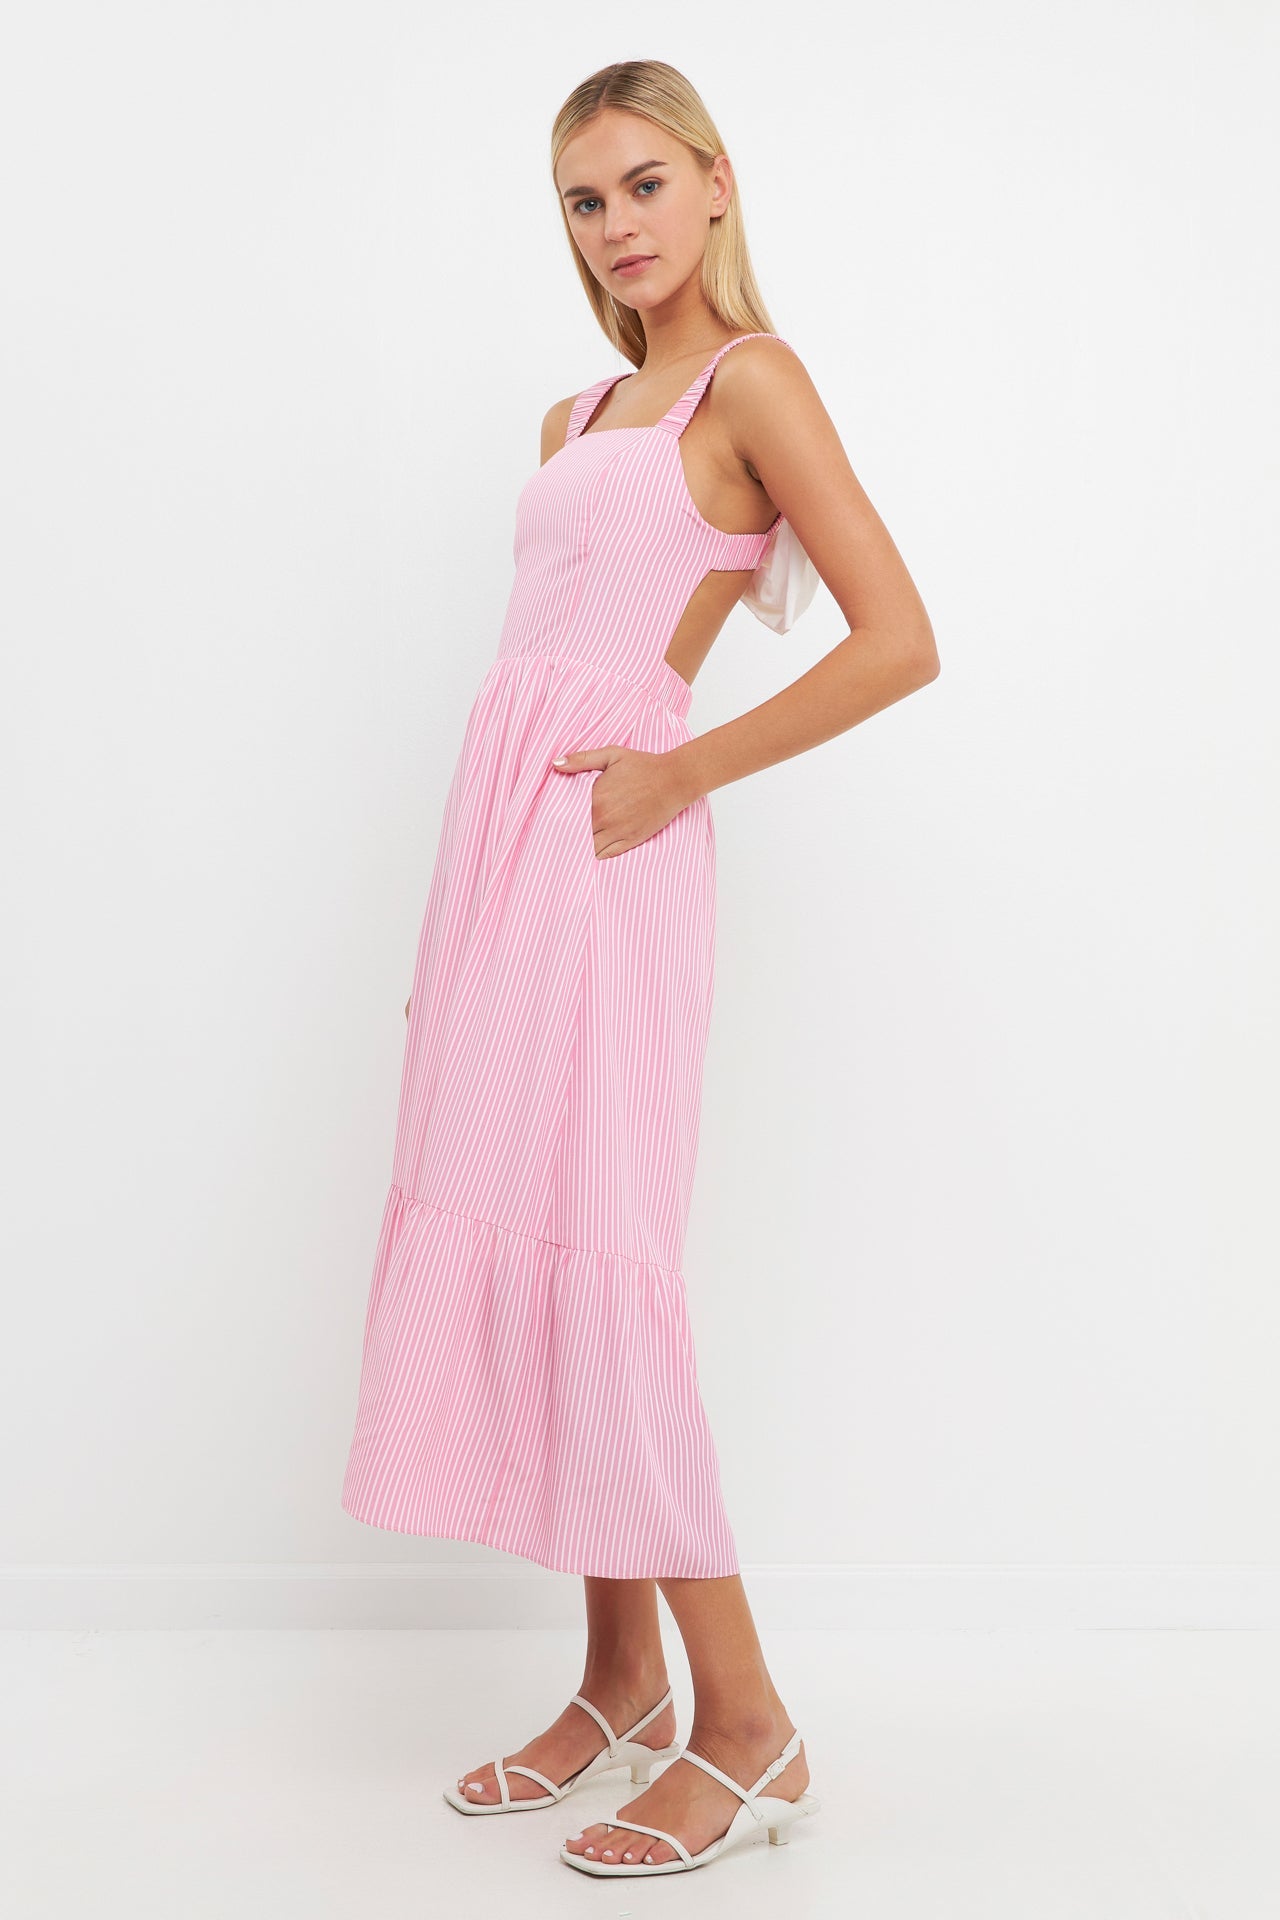 ENGLISH FACTORY-Contrast Bow Striped Maxi Dress-DRESSES available at Objectrare